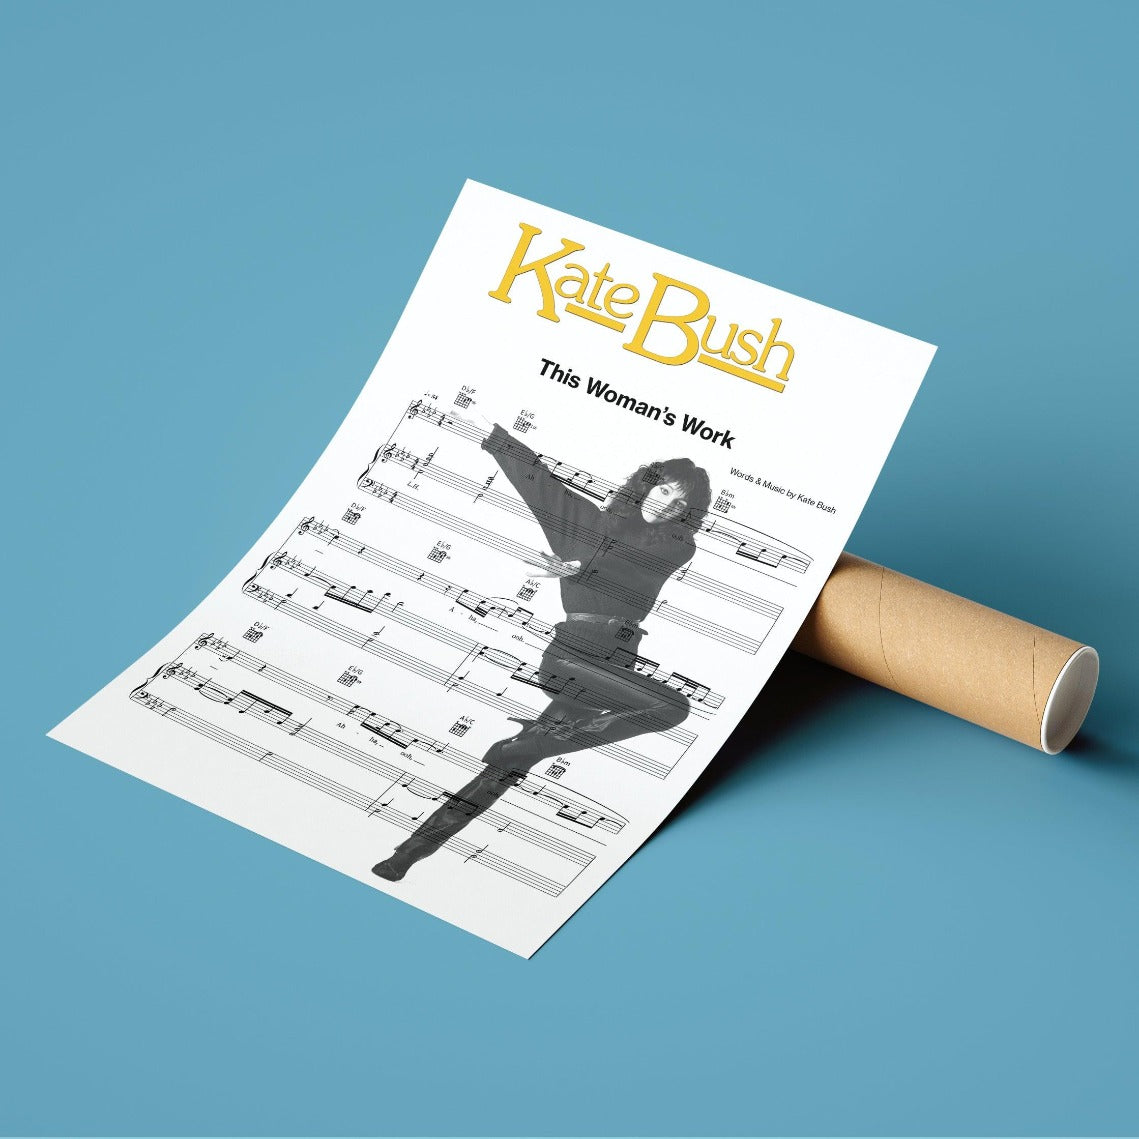 This Woman’s Work is an iconic song by Kate Bush, and now it can be displayed in your home with this one-of-a-kind poster. 98Types Music has brought her classic hit to life with a personalized print, designed to capture and celebrate the song in all its glory. Showcase your love for music on your walls or give it as a gift—this Kate Bush print will remind you of the power of lyrics and the stories they tell. Add a personal touch to your space with this timeless design.